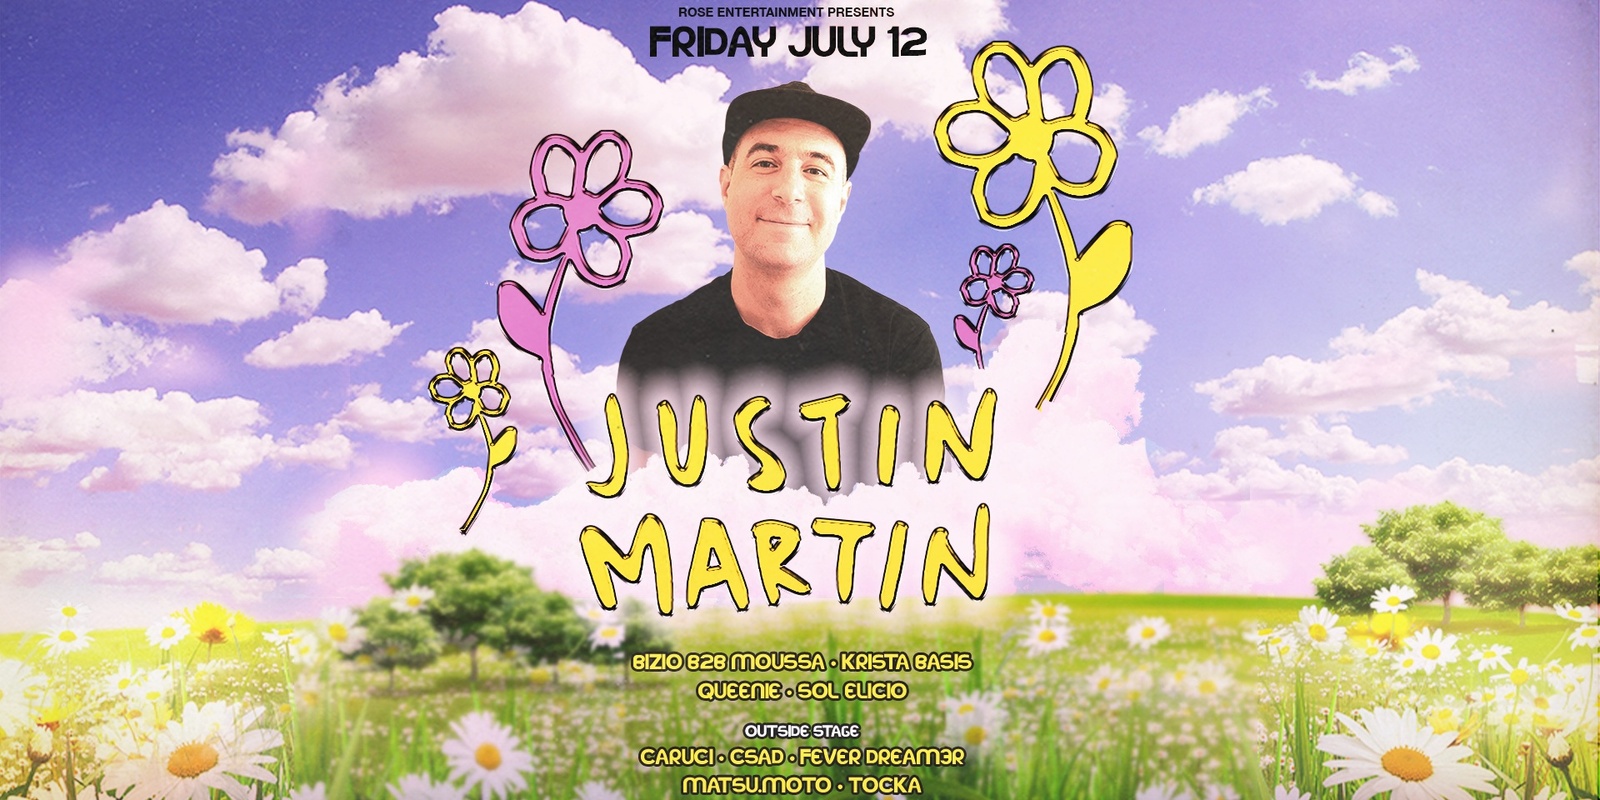 Banner image for Rose Entertainment Presents: Justin Martin